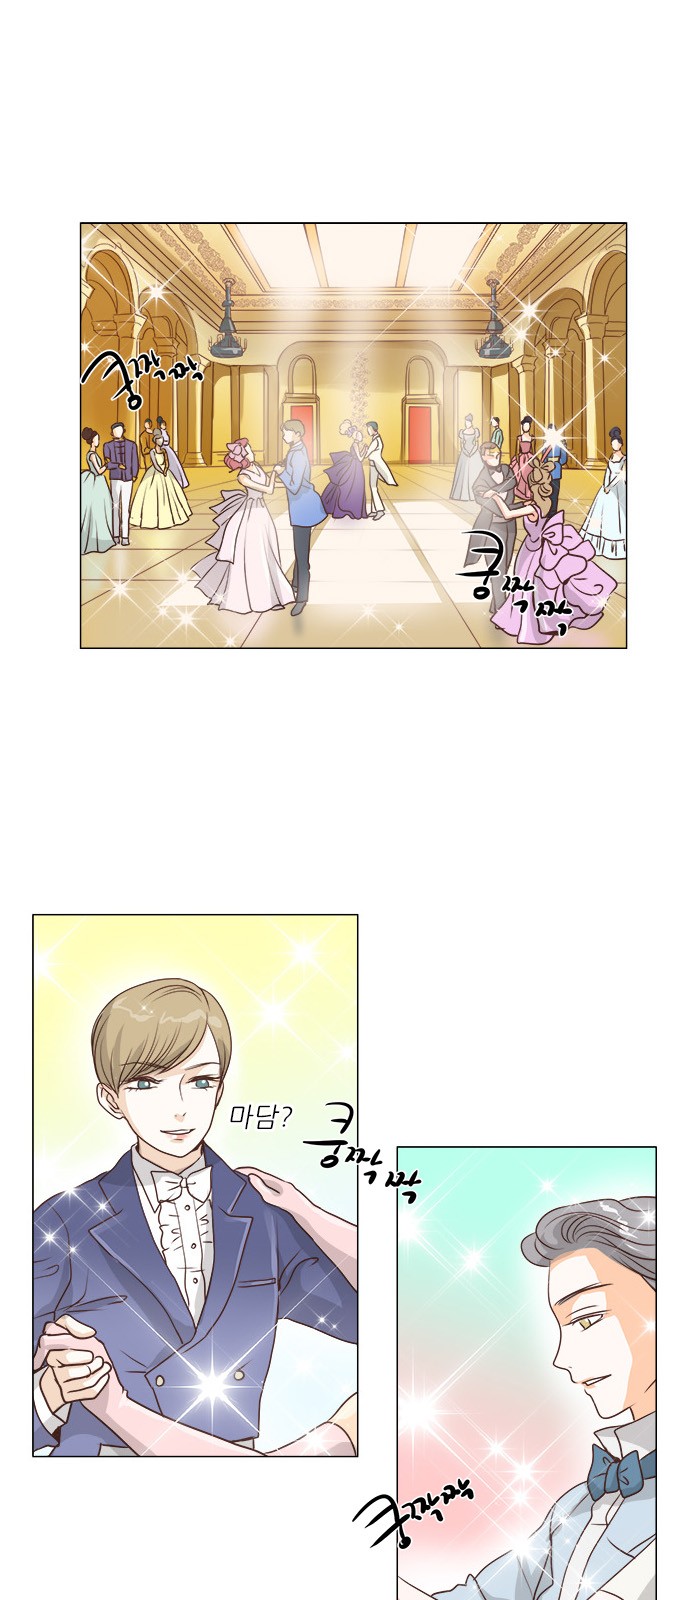 The Matchmaking Baby Princess - Chapter 13 - Page 1